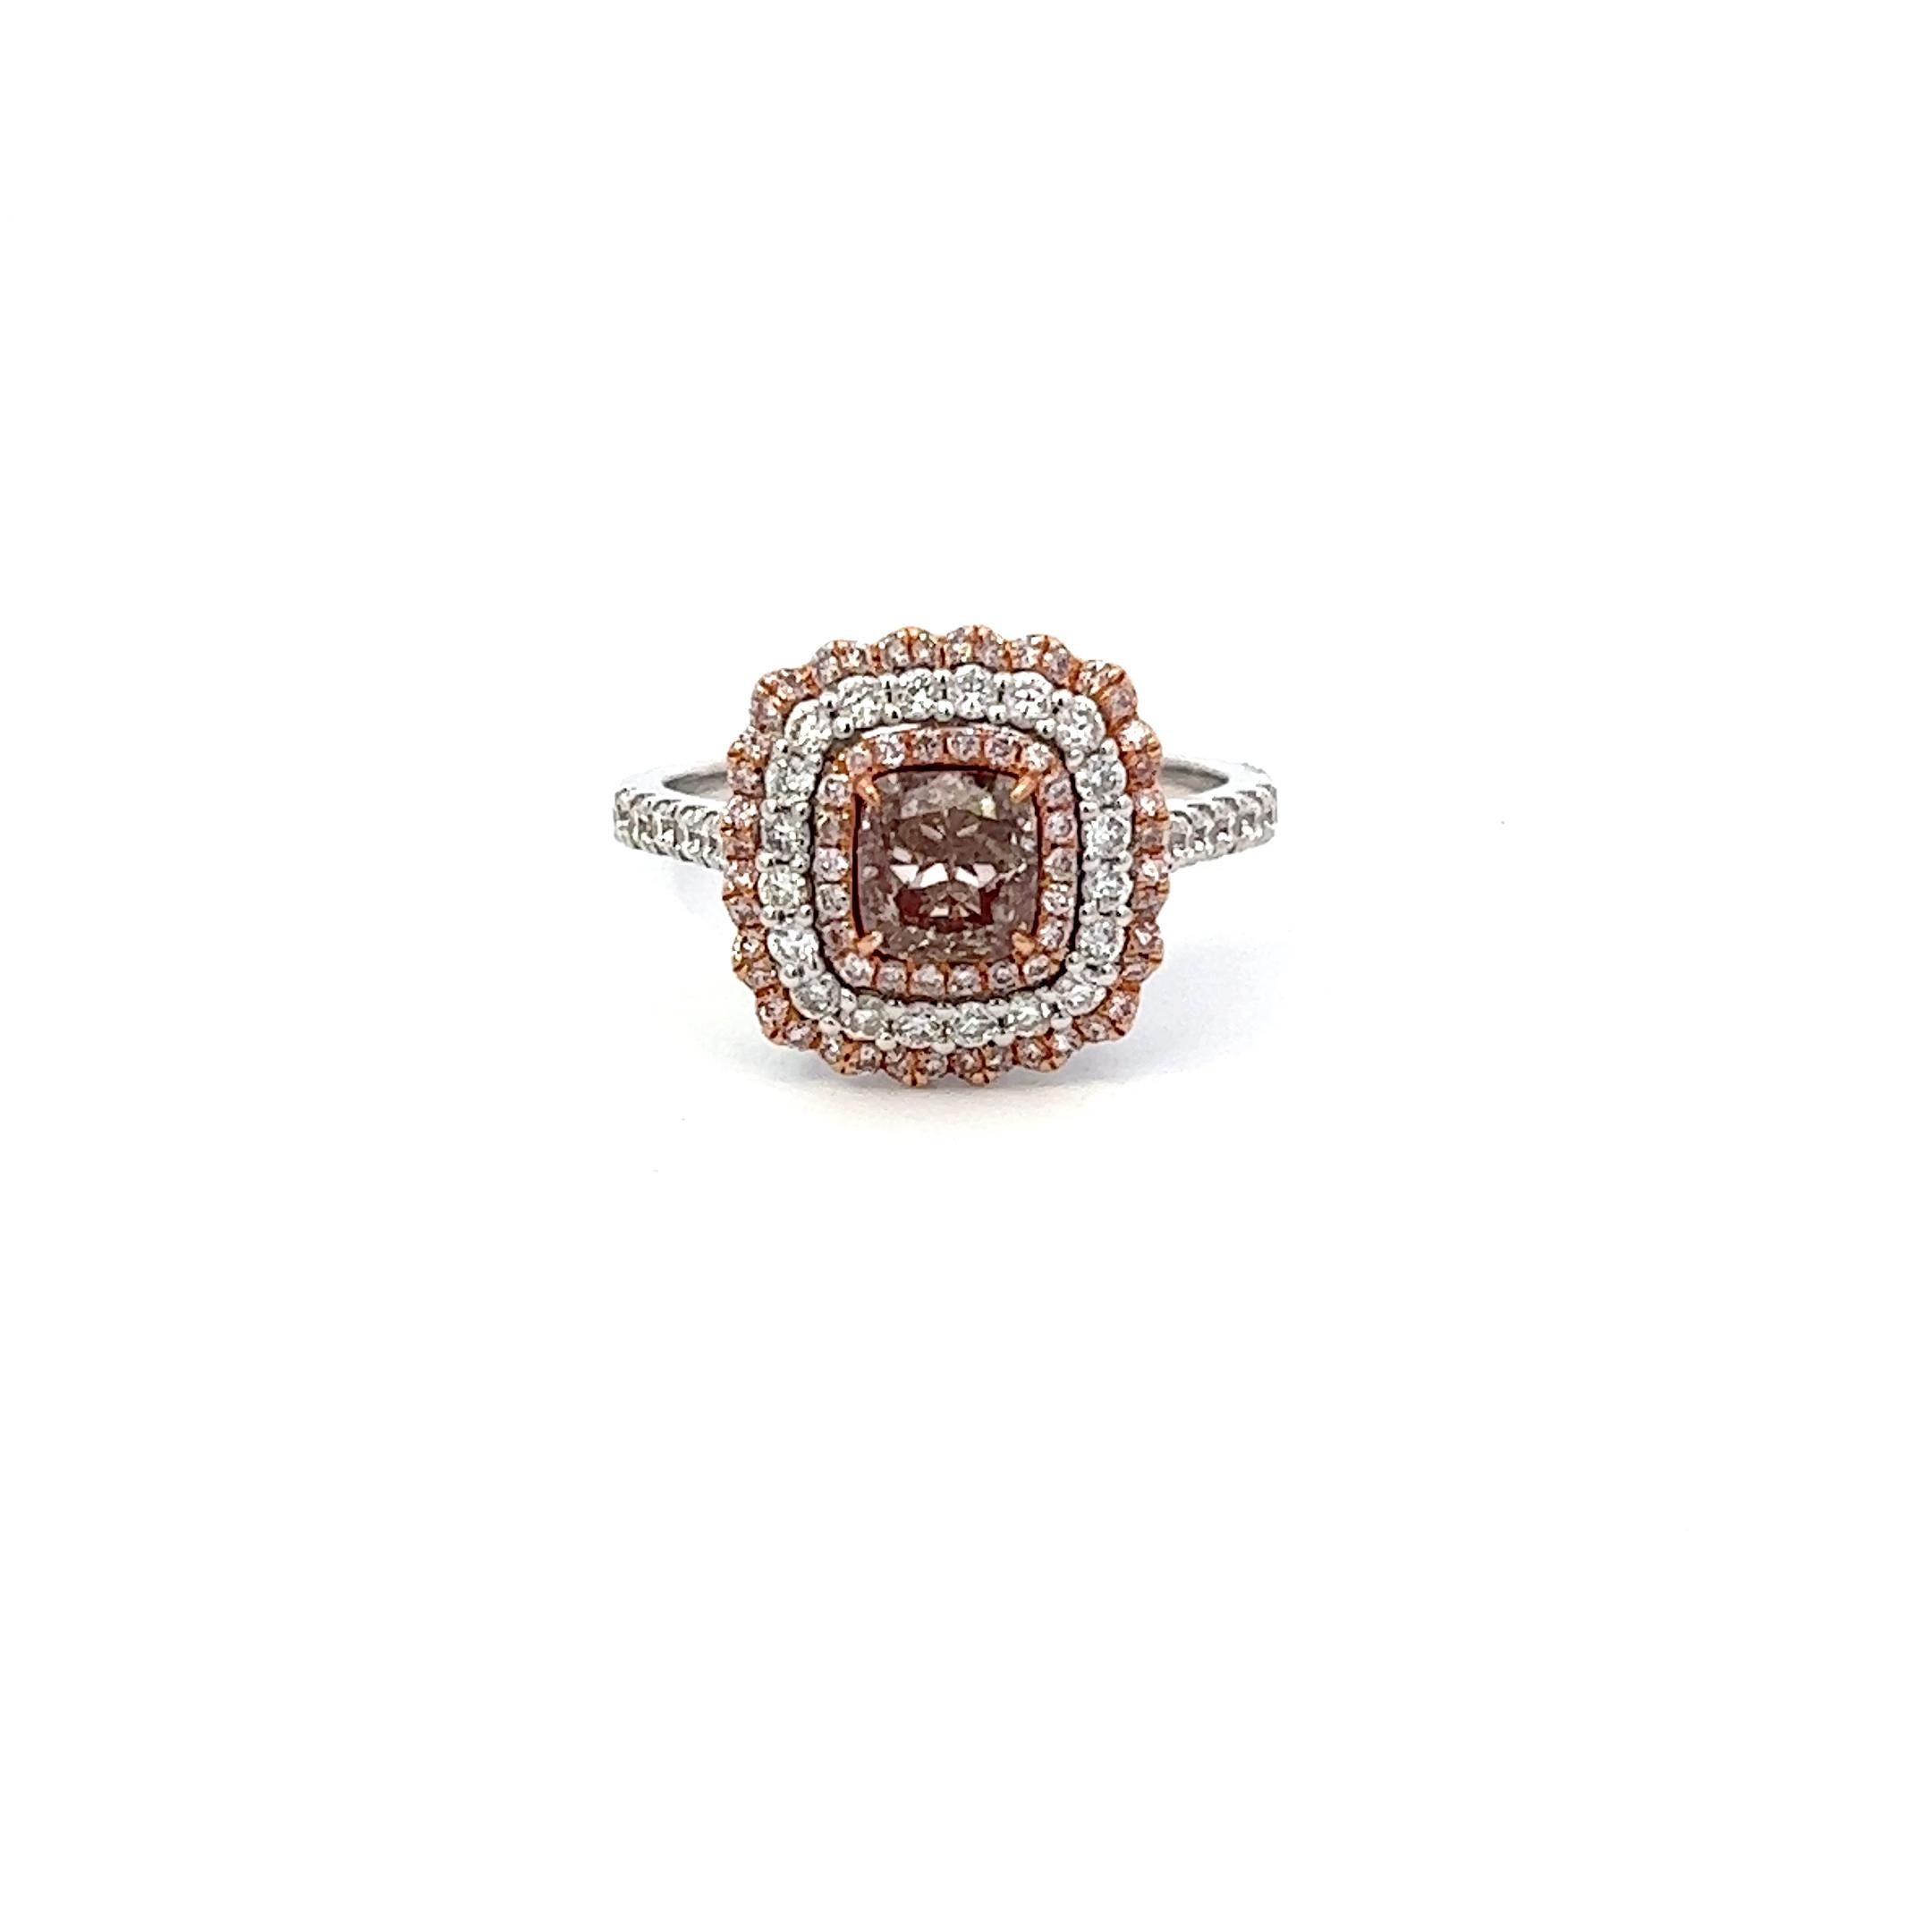 Center: 0.81ct Fancy Pinkish Brown Cushion I1 GIA# 7258797671
Setting: 18k White Gold 0.63ctw Pink and White Diamonds

An extremely rare and stunning natural pink diamond center. Pink Diamonds account for less than 0.01% of all diamonds mined in the